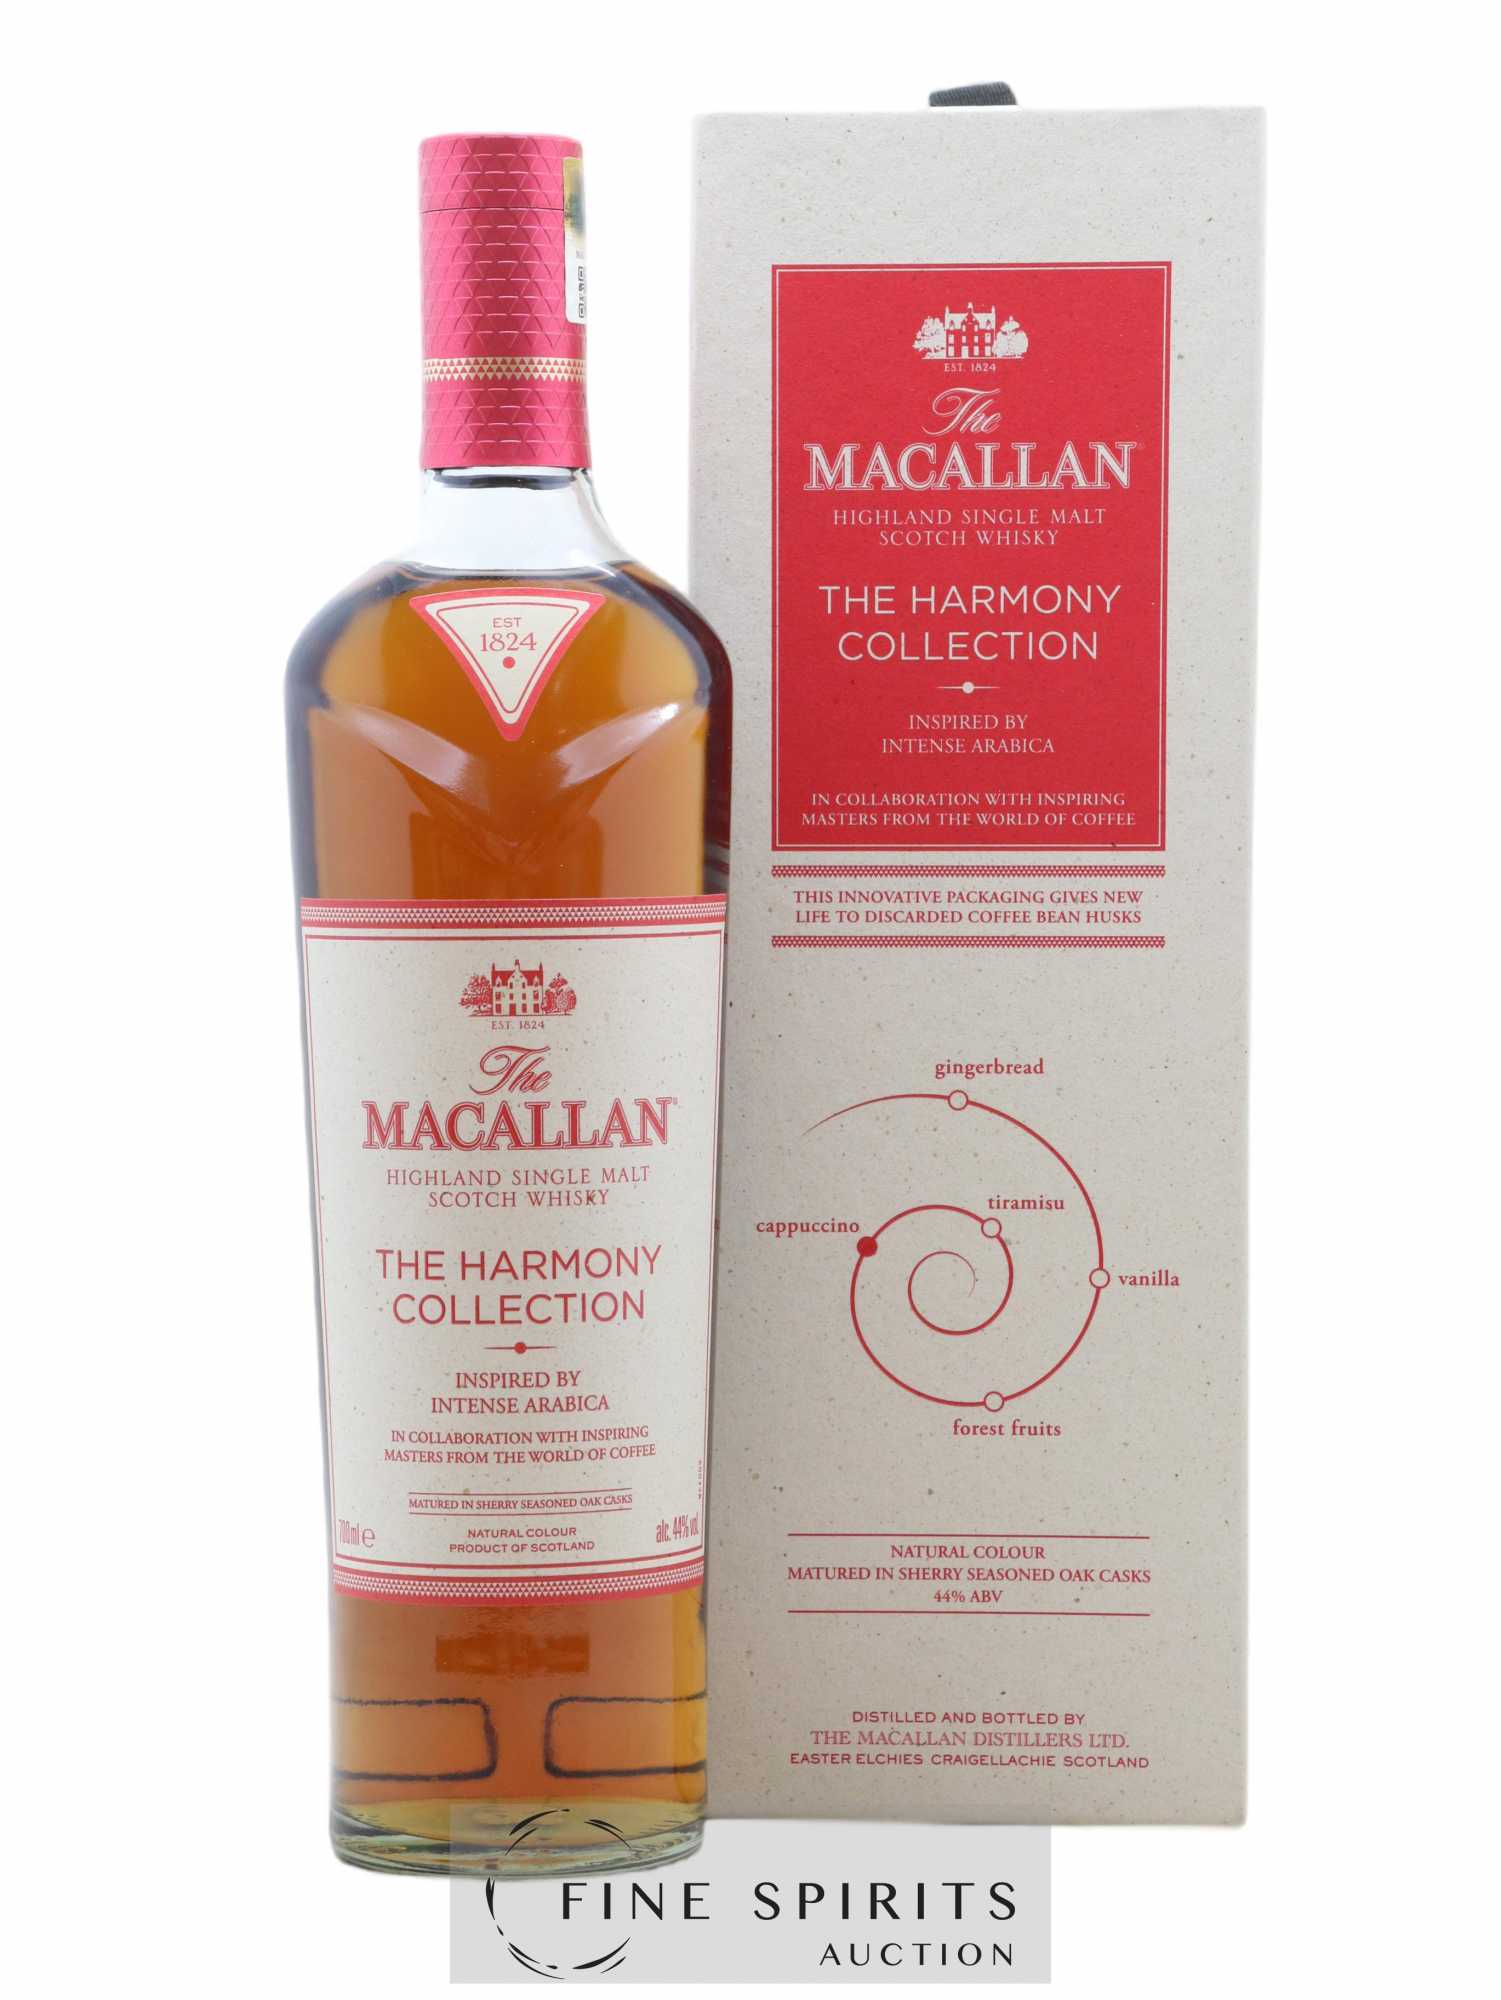 Macallan (The) Of. The Harmony Collection Inspired by Intense Arabica